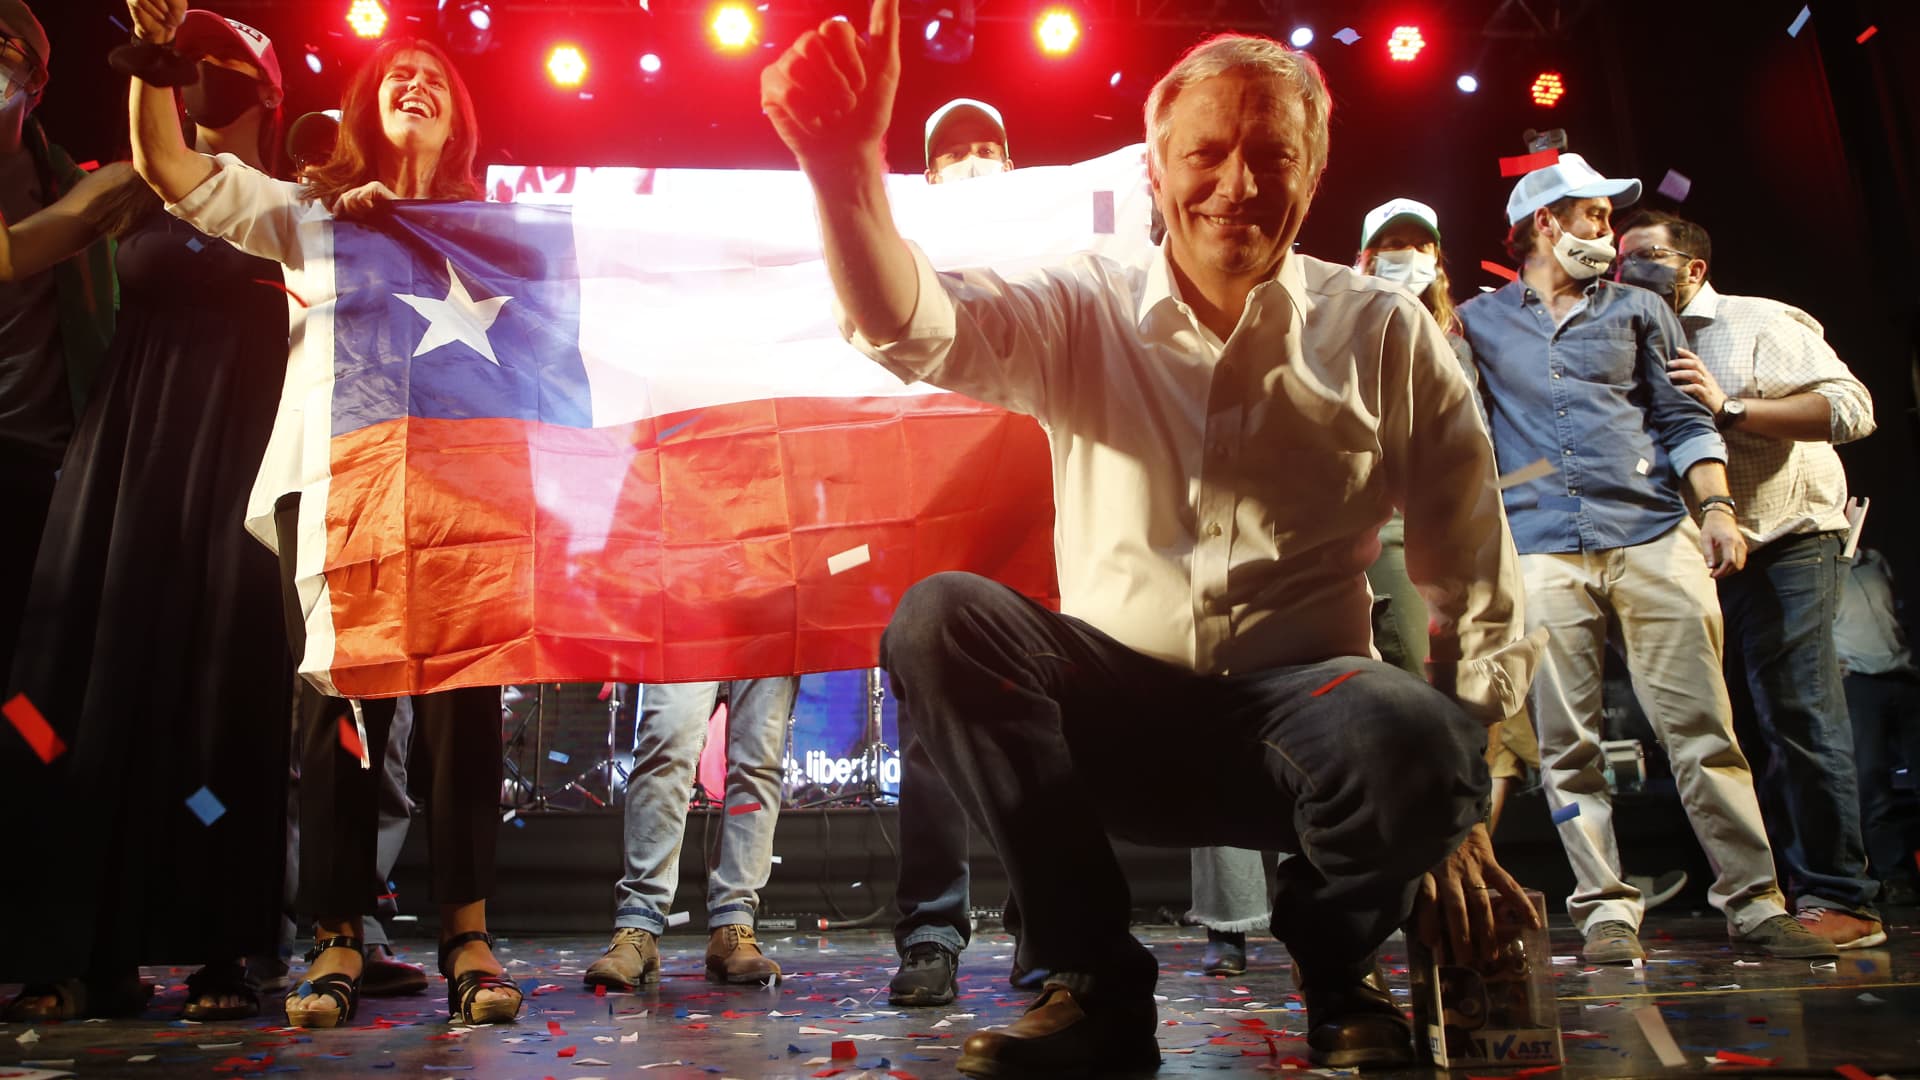 Chilean presidential candidate Jose Antonio Kast of the Republican Party greets supporters during the presidential elections campaign closing rally on November 18, 2021 in Santiago, Chile.